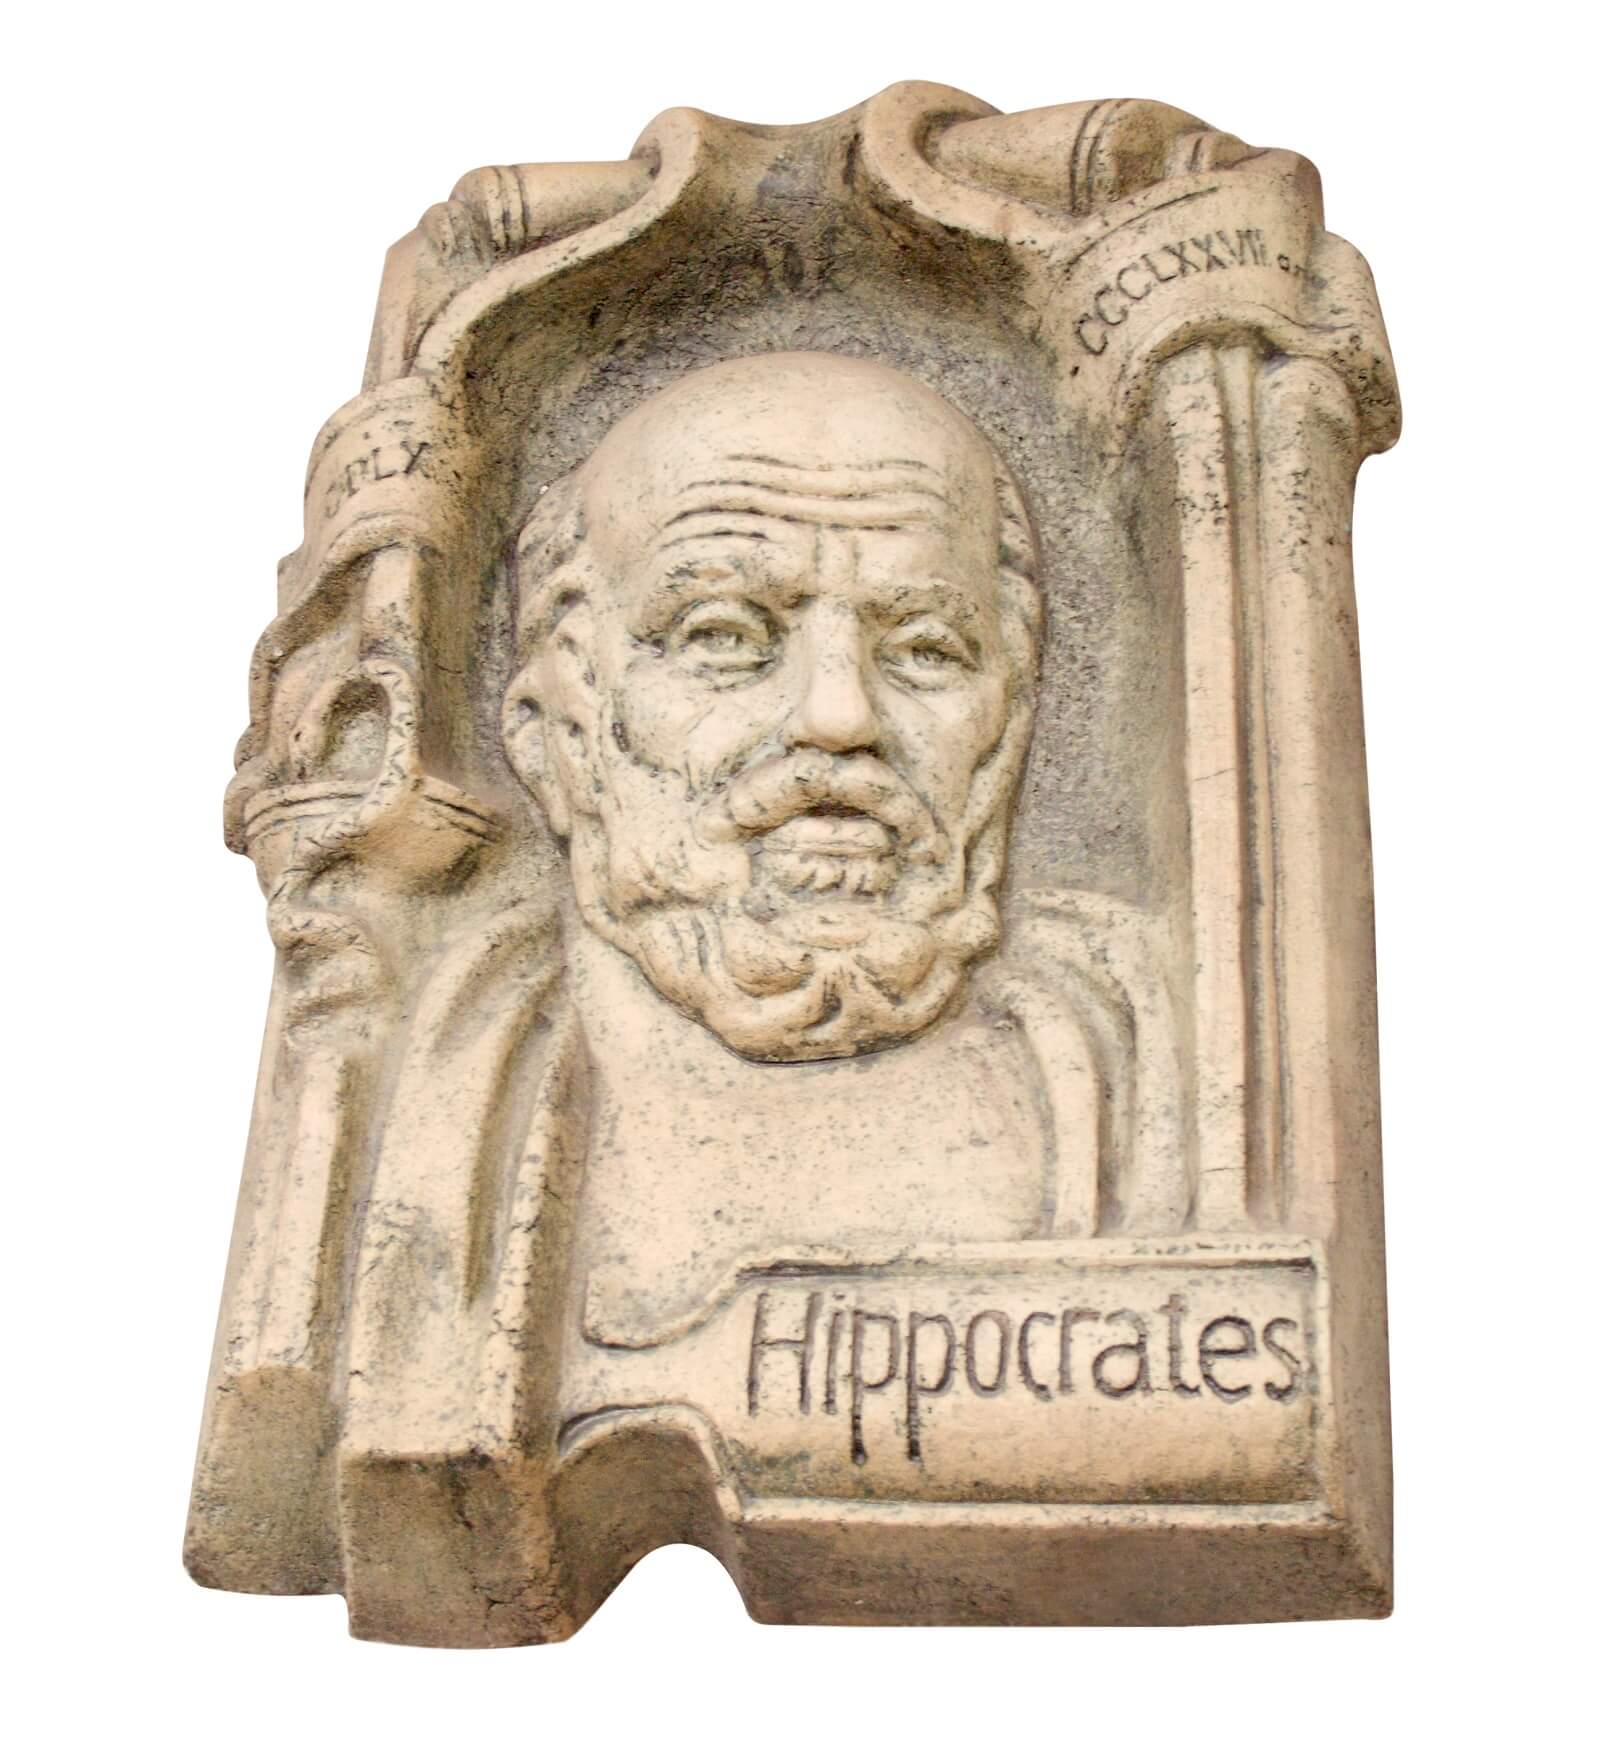 Hippocrates of Kos; a Greek physician of the classical period.